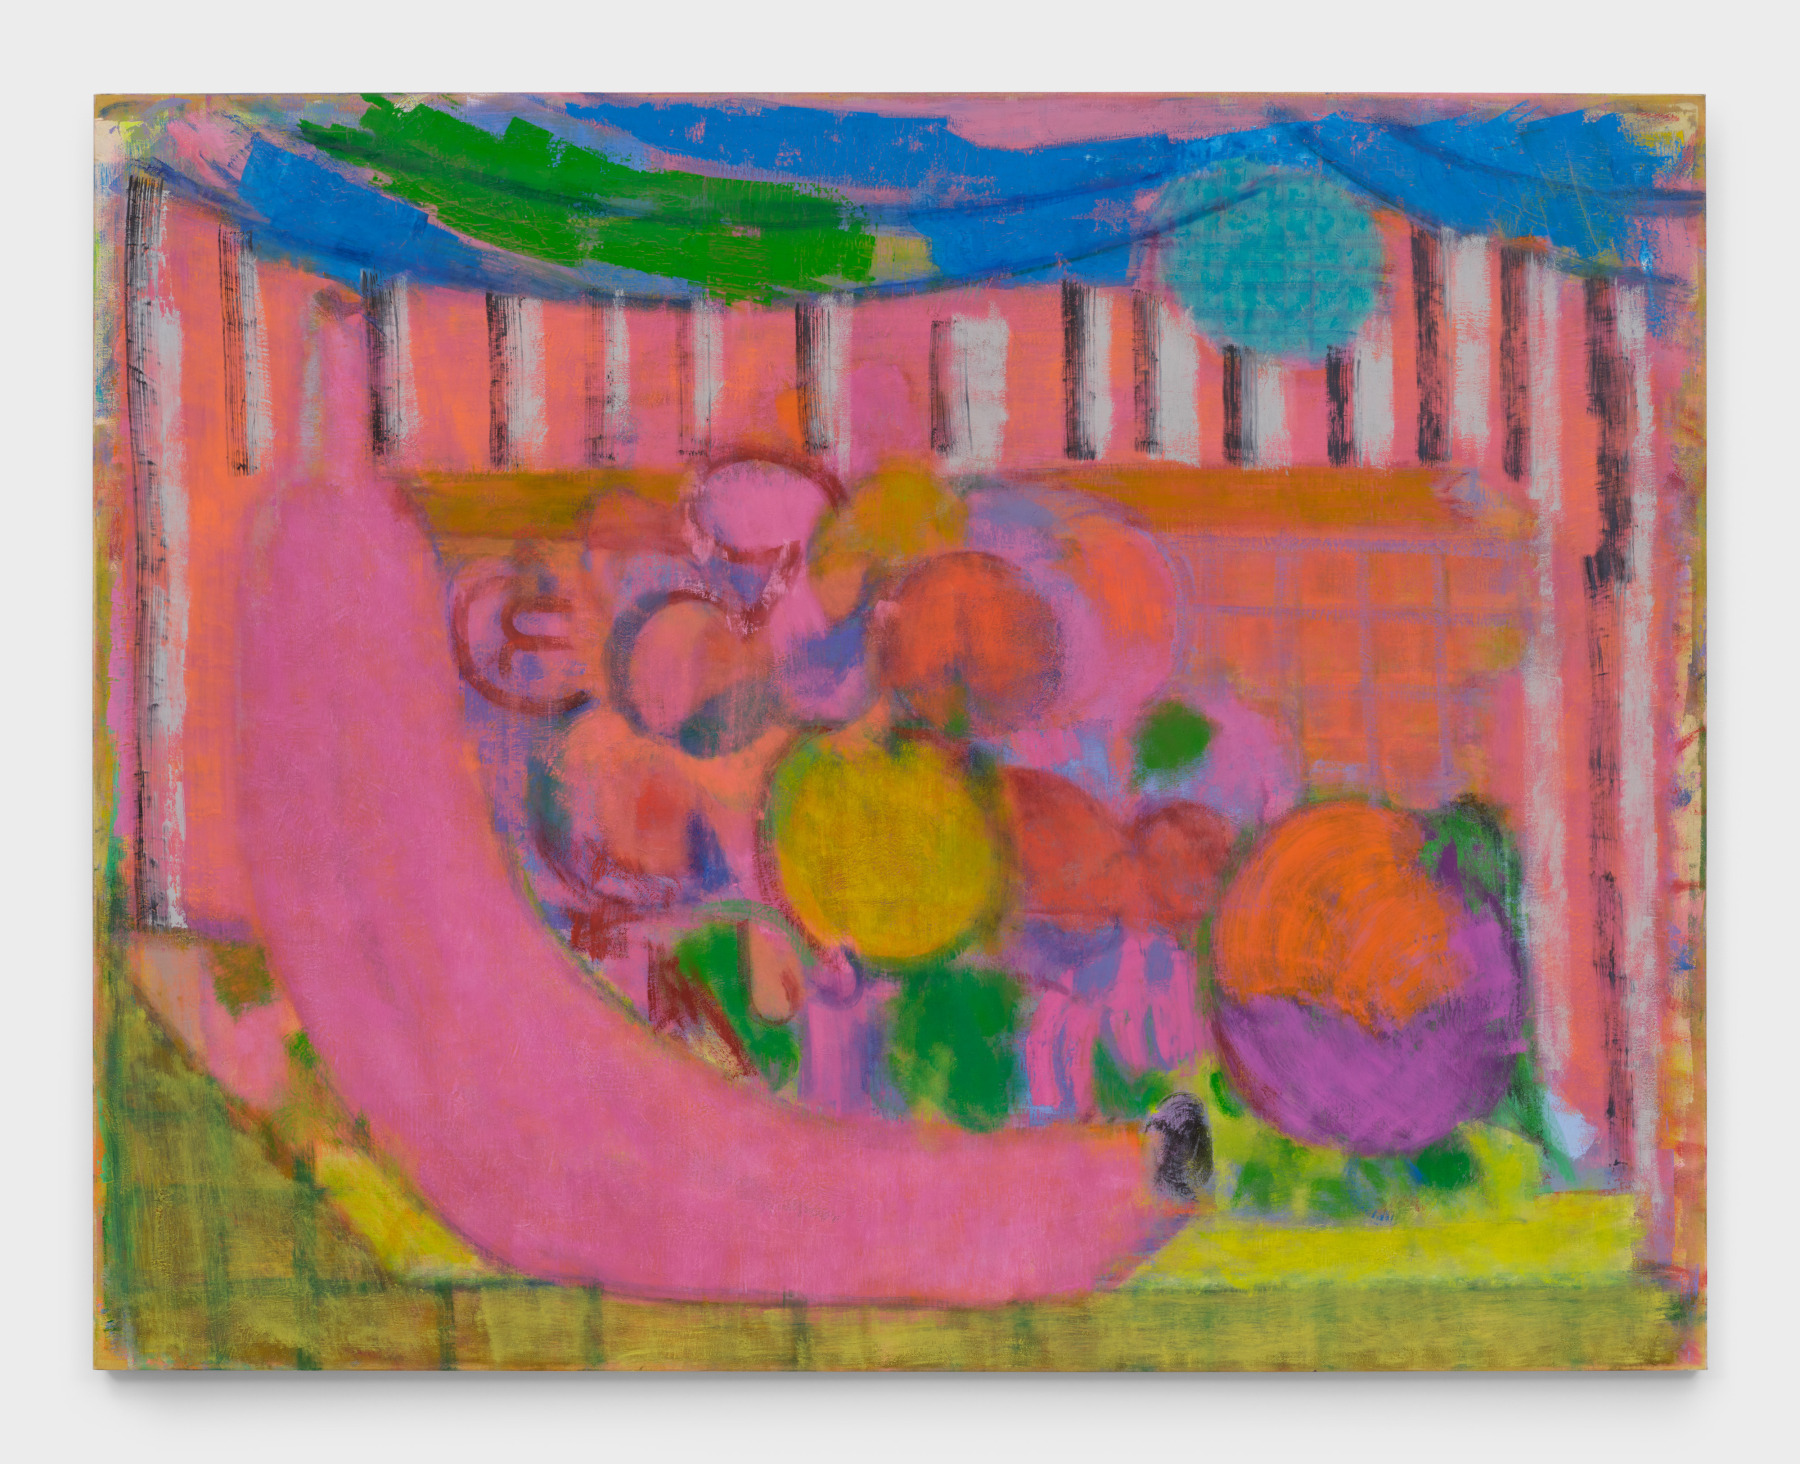 A painting by Michael Berryhill titled "Palais Romantique," which features a basket of fruit rendered in bright colors